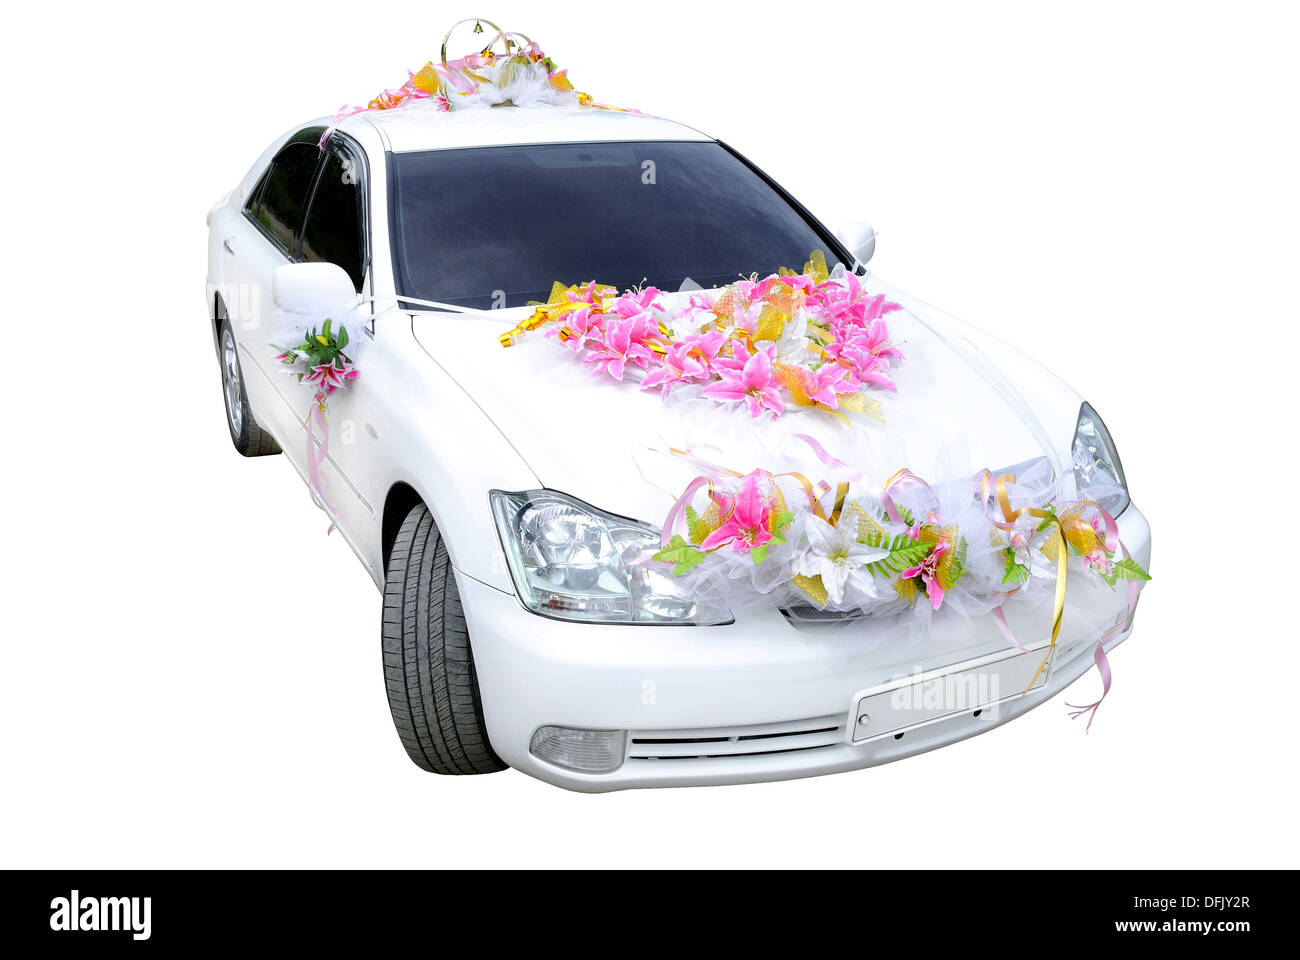 The white wedding car decorated with flowers on a white background ...